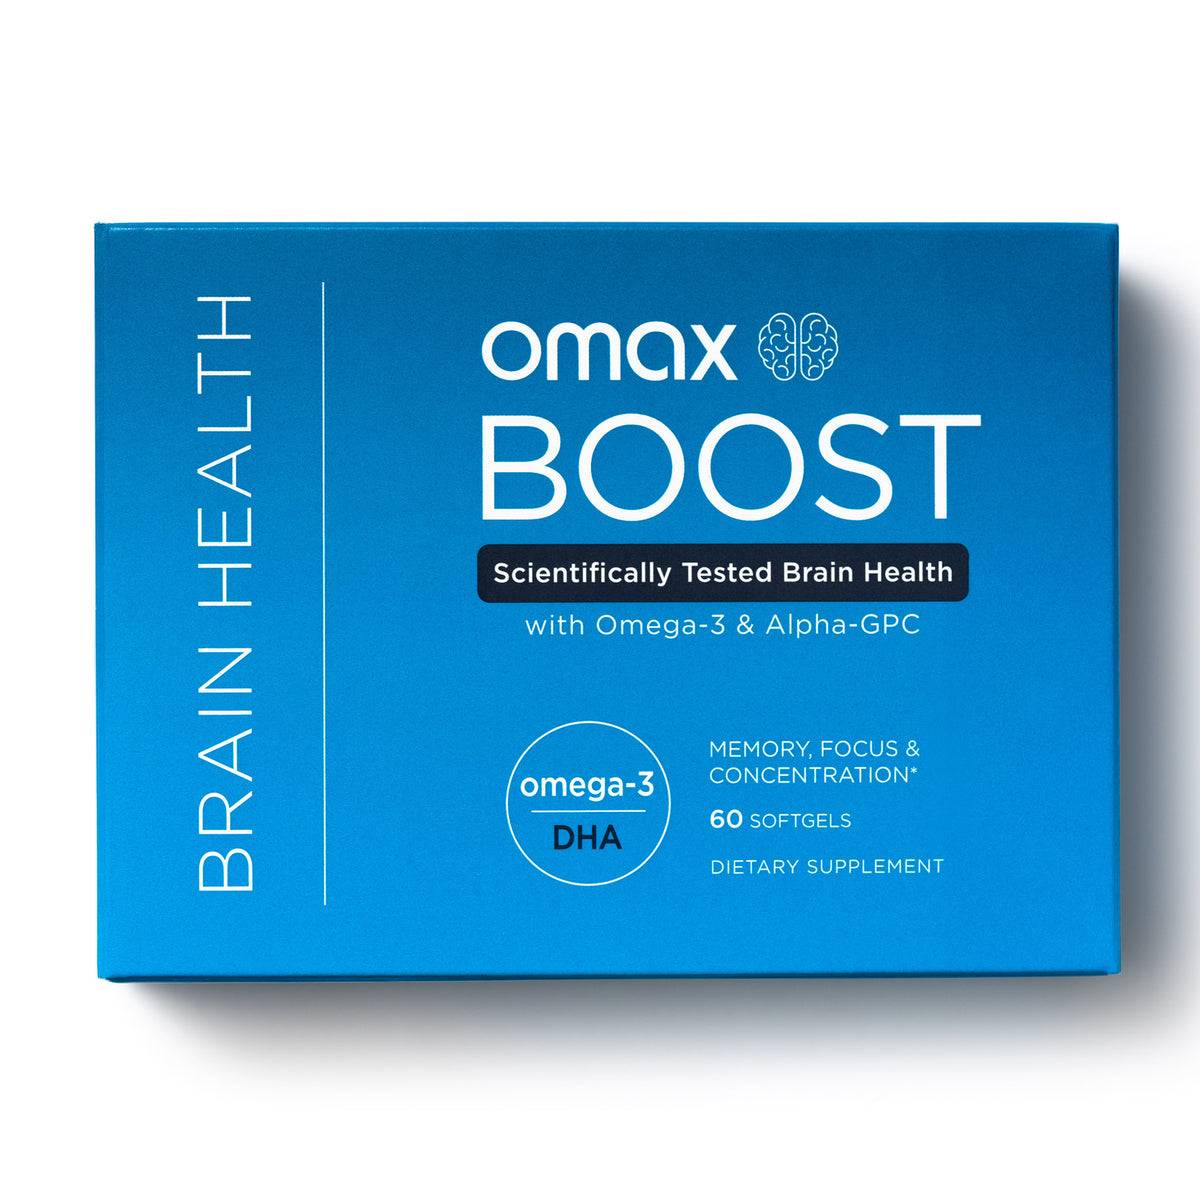 Omax® Boost Brain Health Supplement (New Packaging) - Omax Health